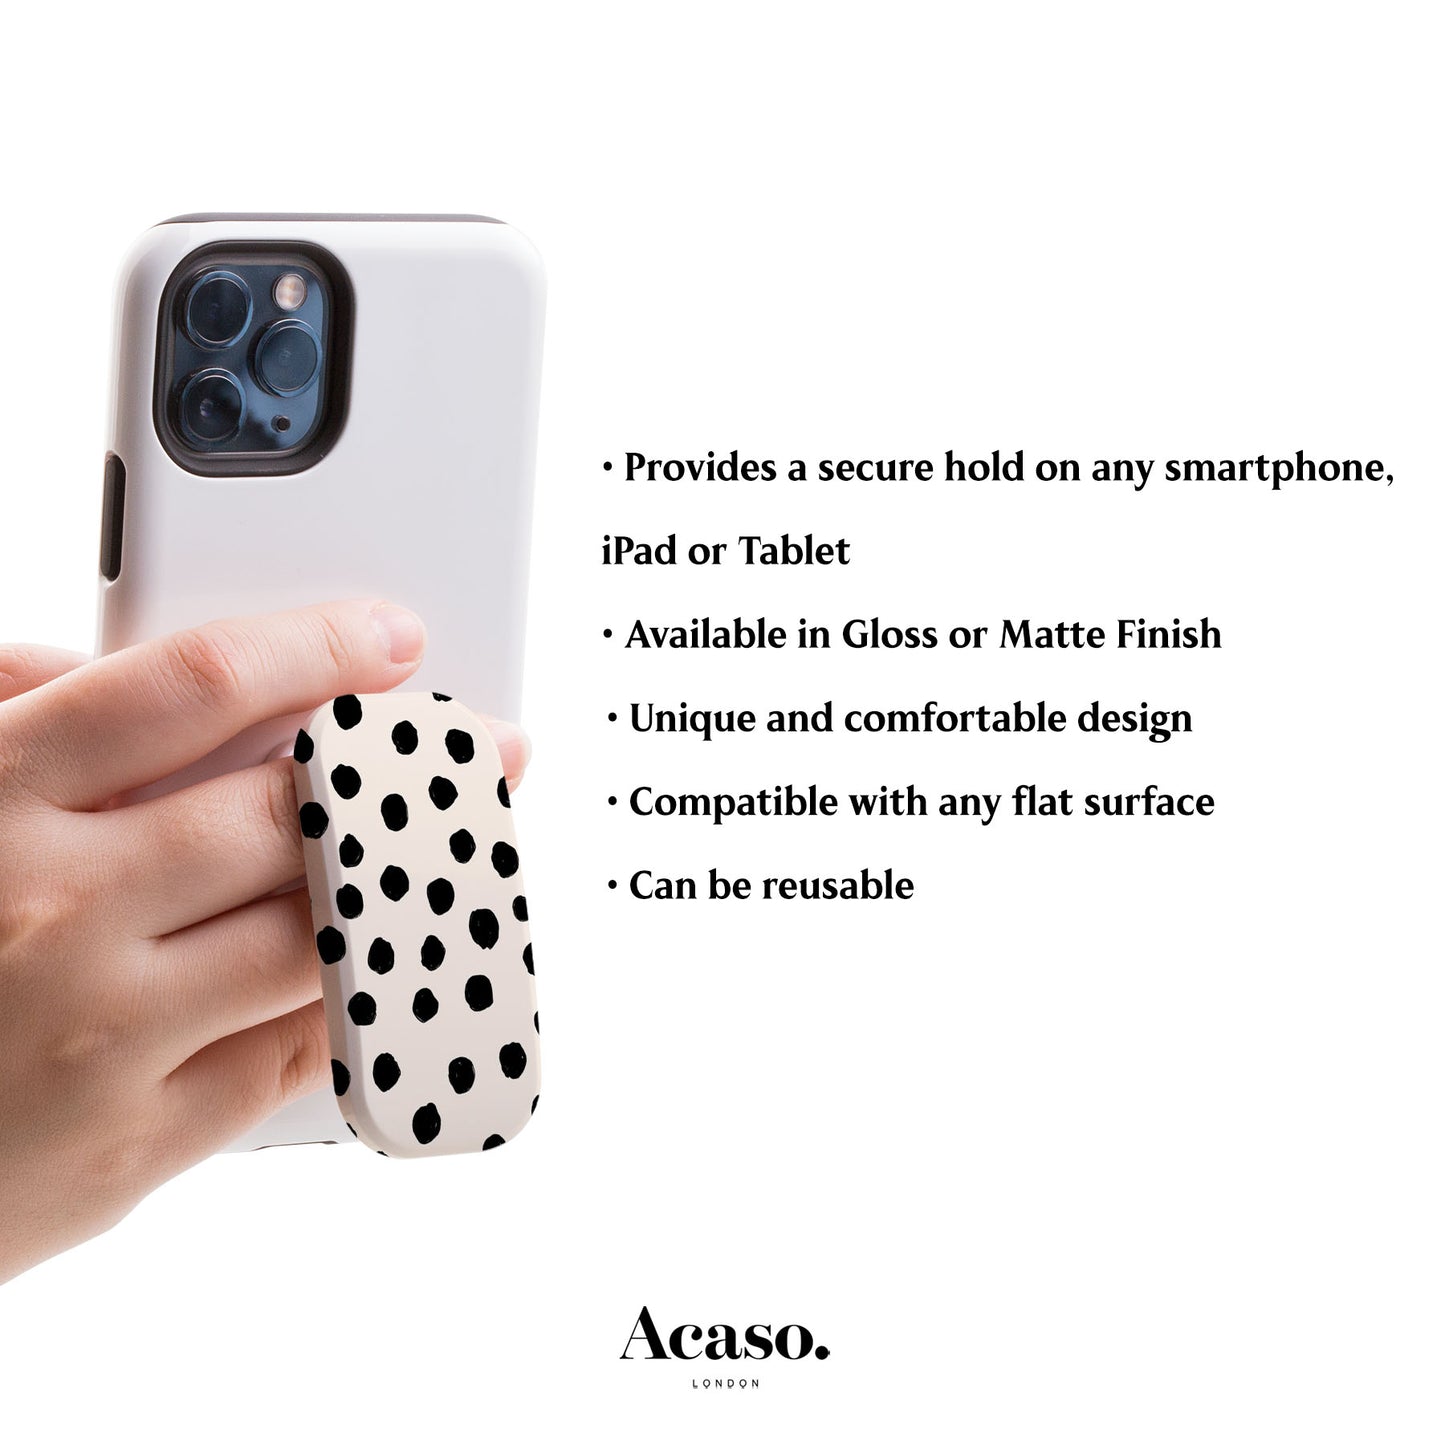 PAINTED DOTS White Phone Grip